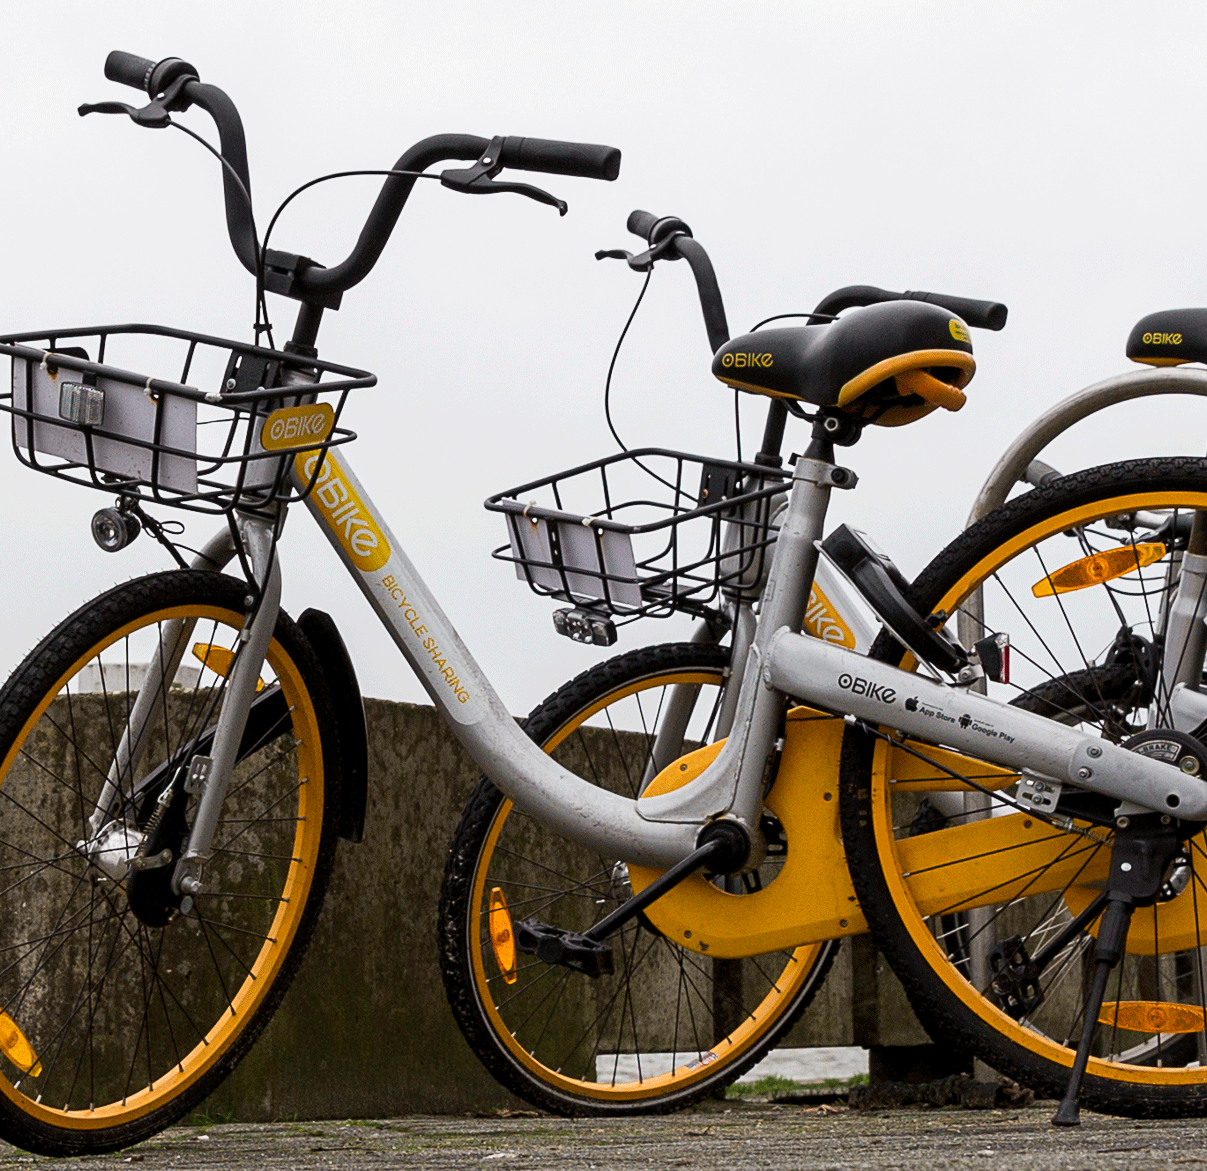 oBikes leaning against a low wall